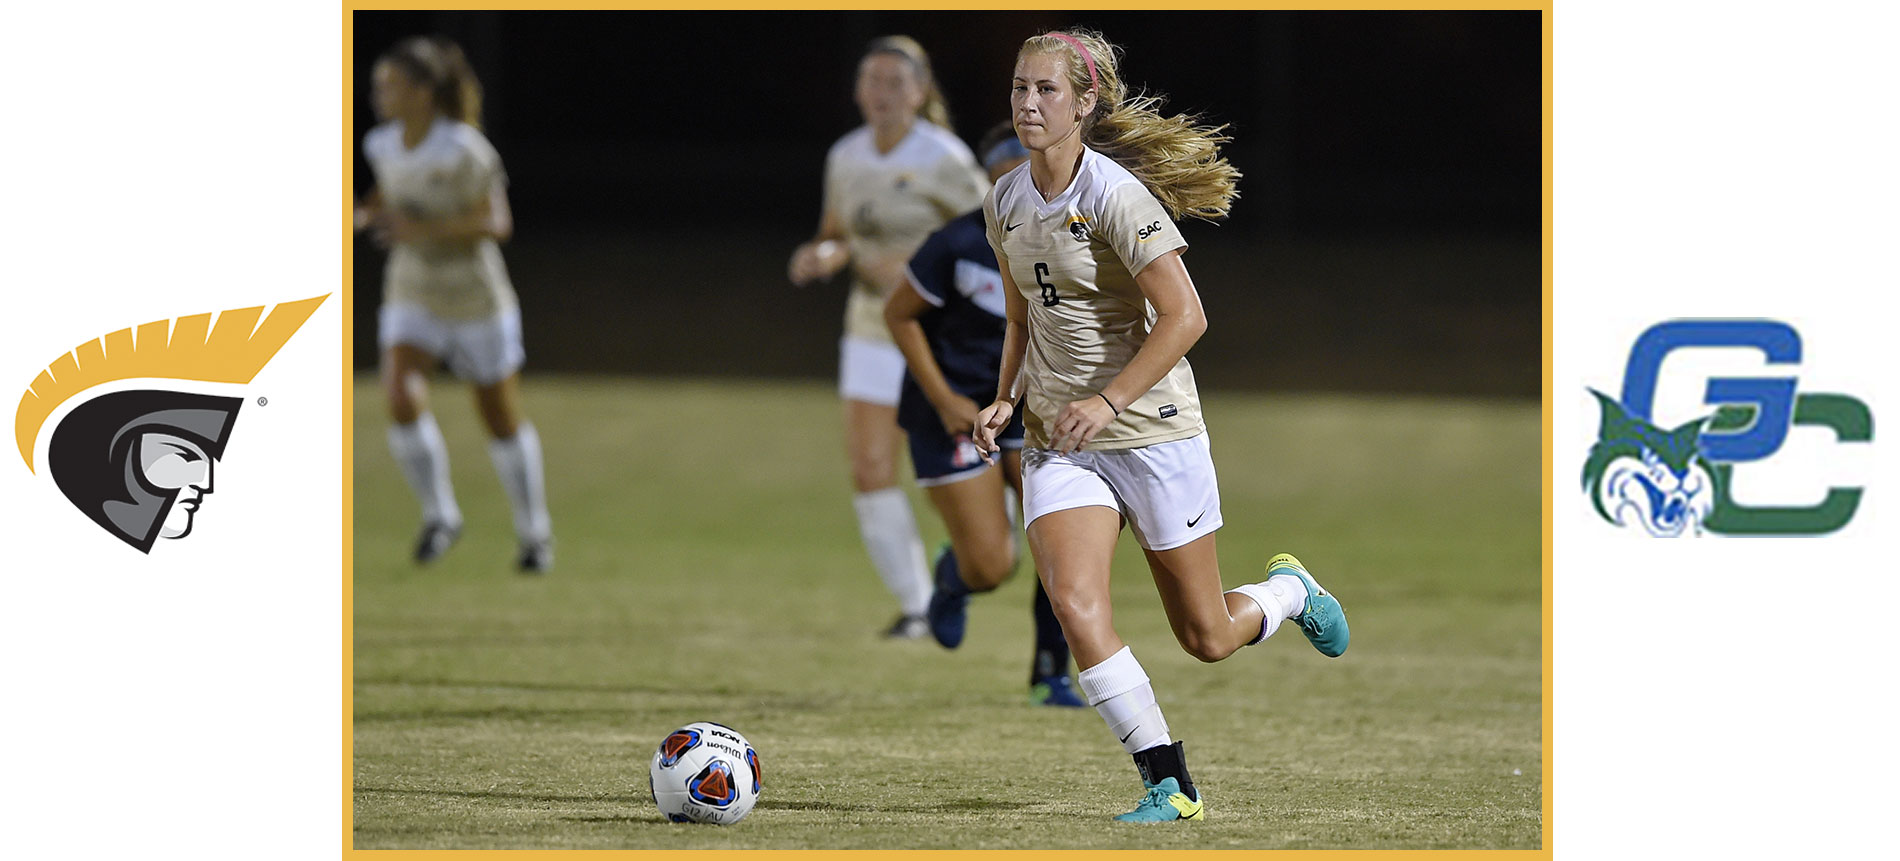 Women’s Soccer Welcomes Georgia College to Open 2018 Campaign